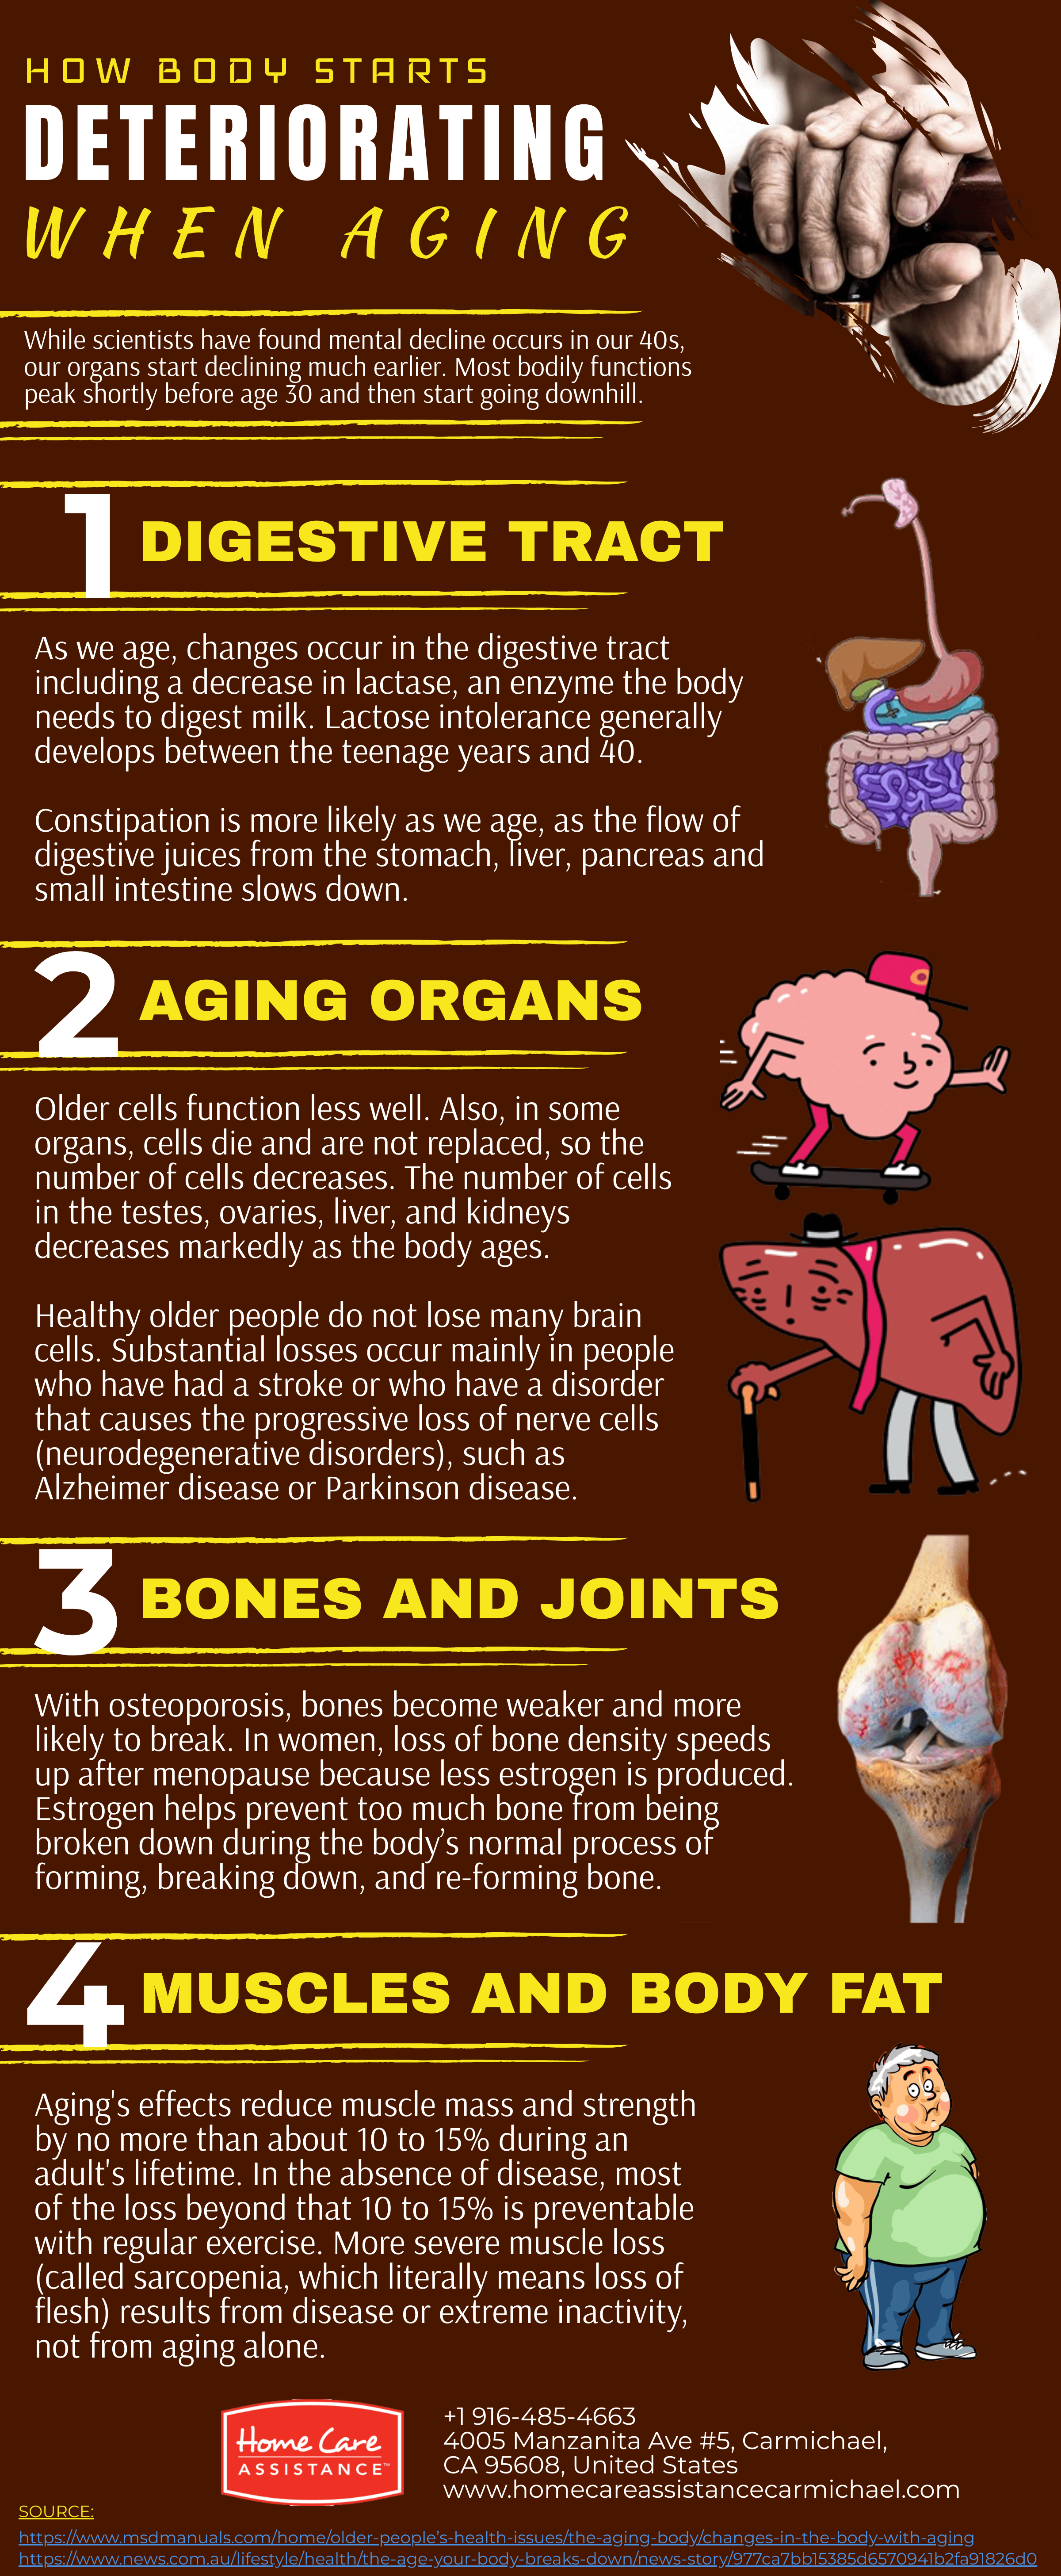 How the Body Starts Deteriorating When Aging [Infographic]